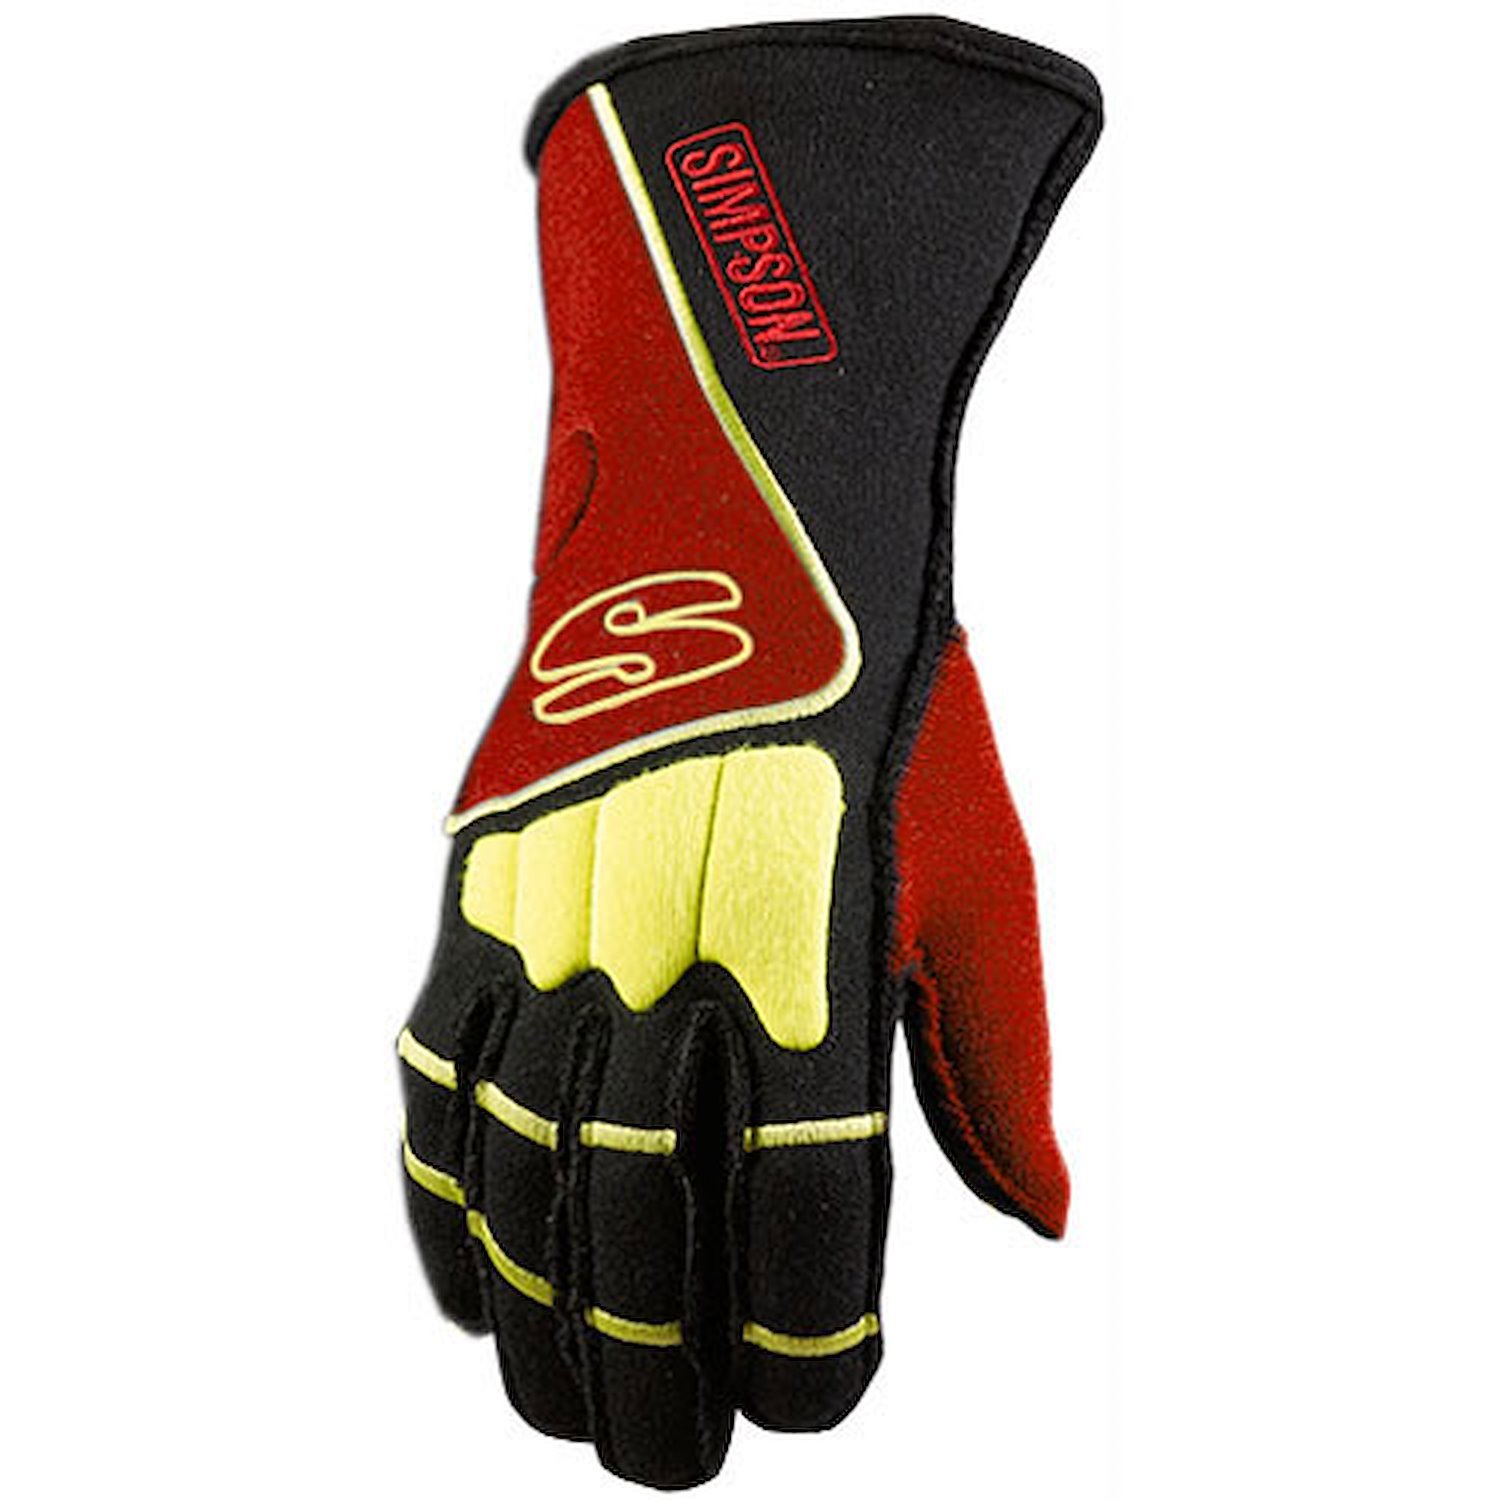 SFI 3.3/5 DNA Racing Gloves Size: Small